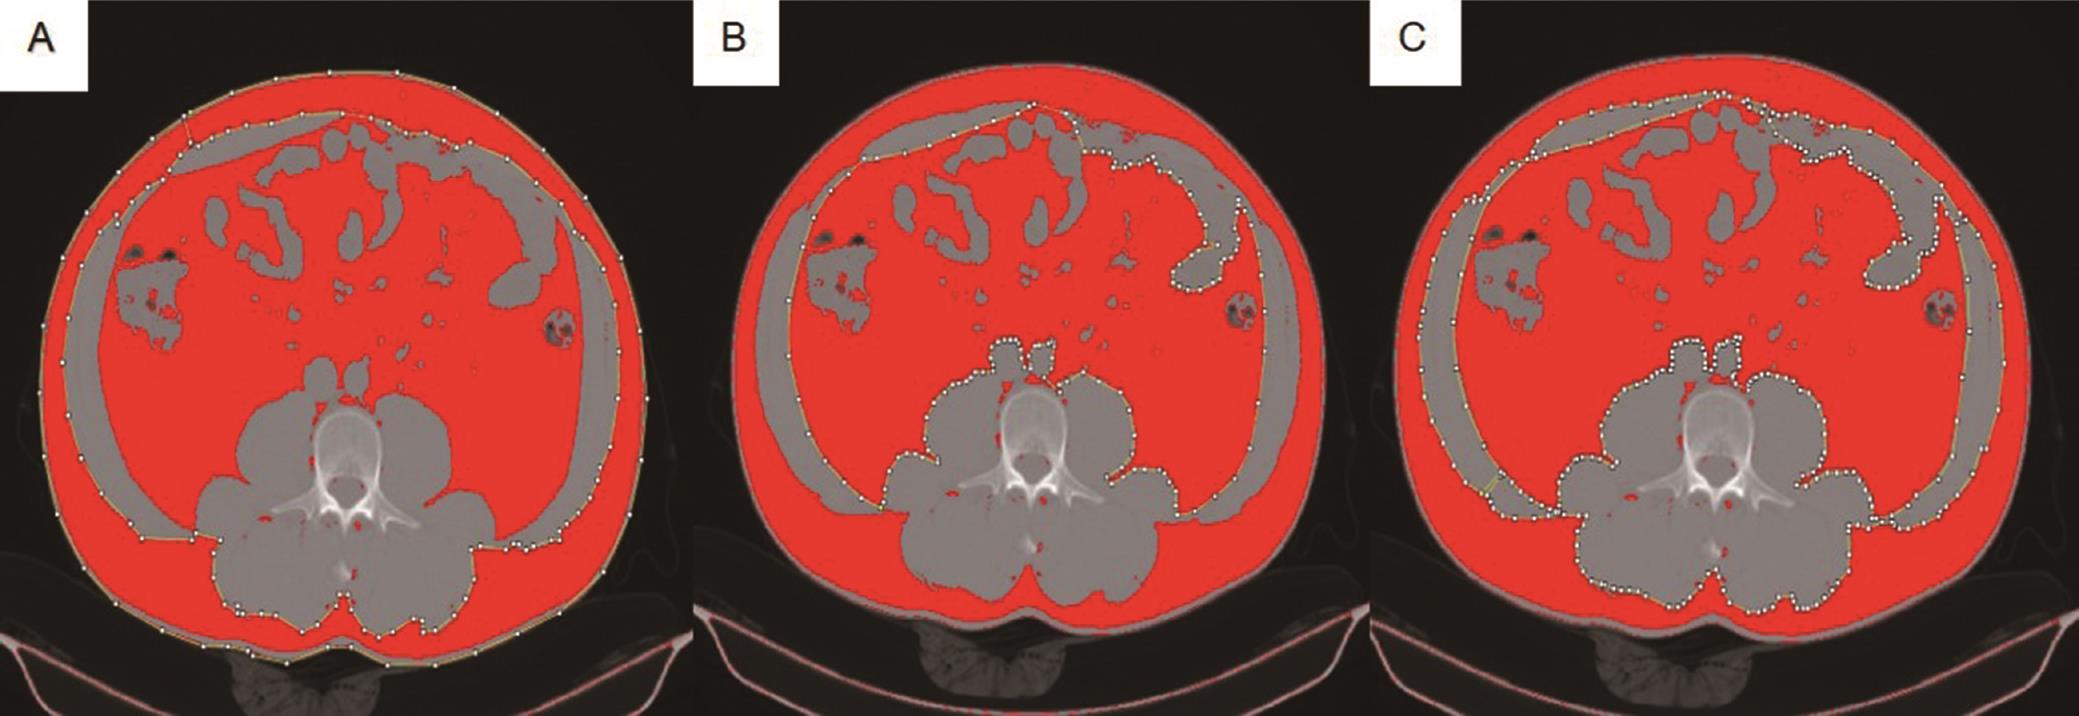 Illustrations of abdominal fat marked with ImageJ software. SAT (A), VAT (B), and IMAT (C).